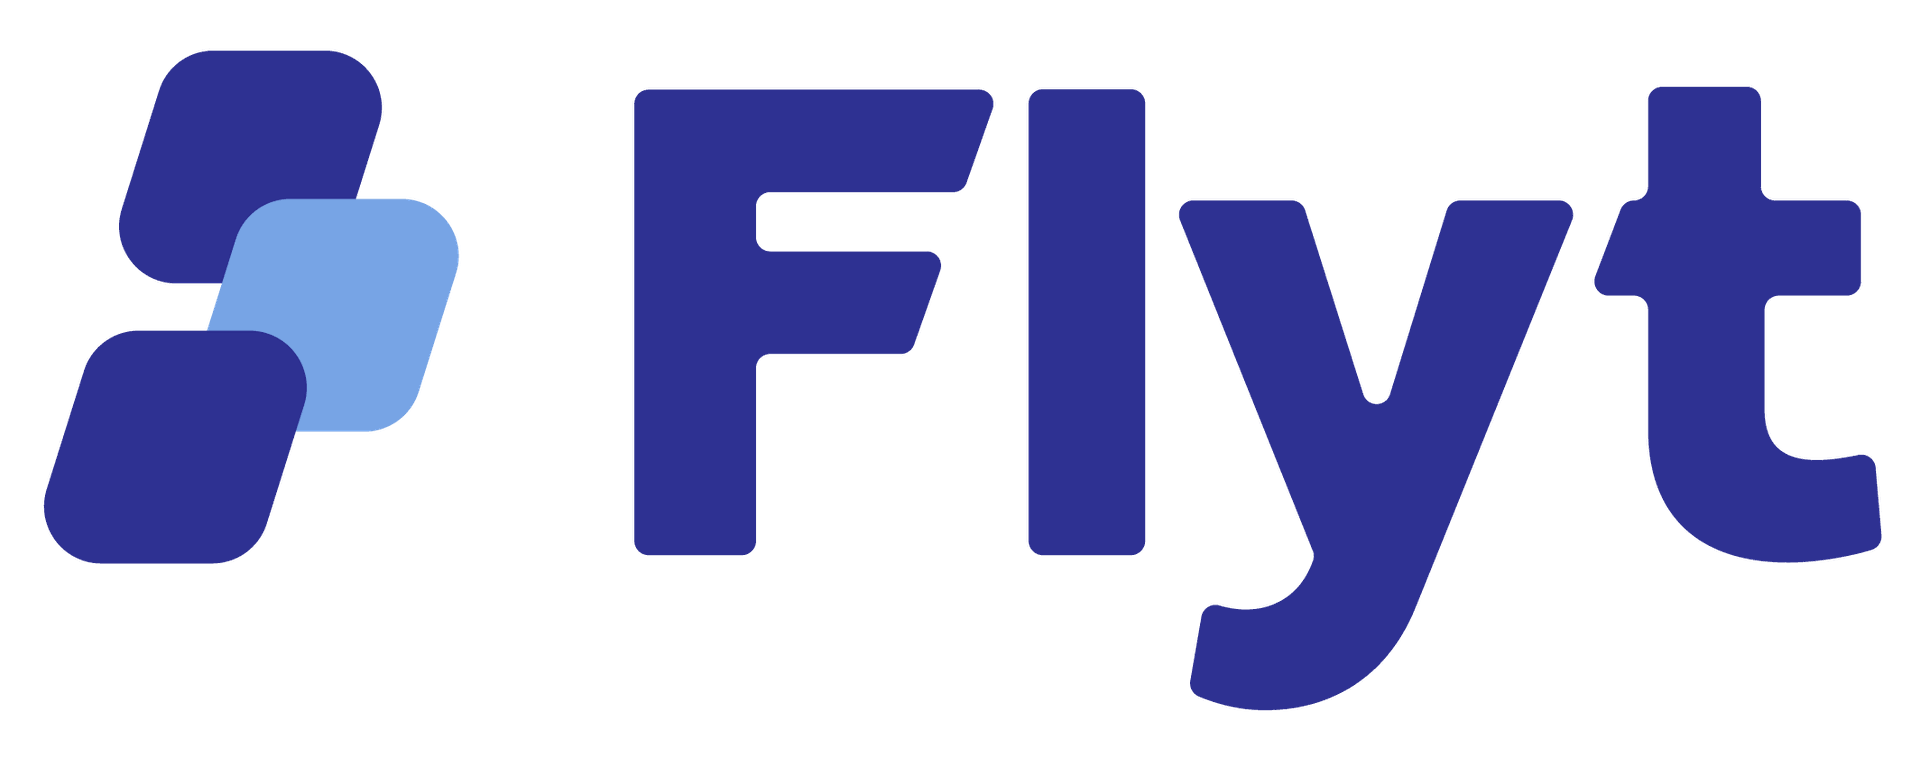 Flyt Consulting AS